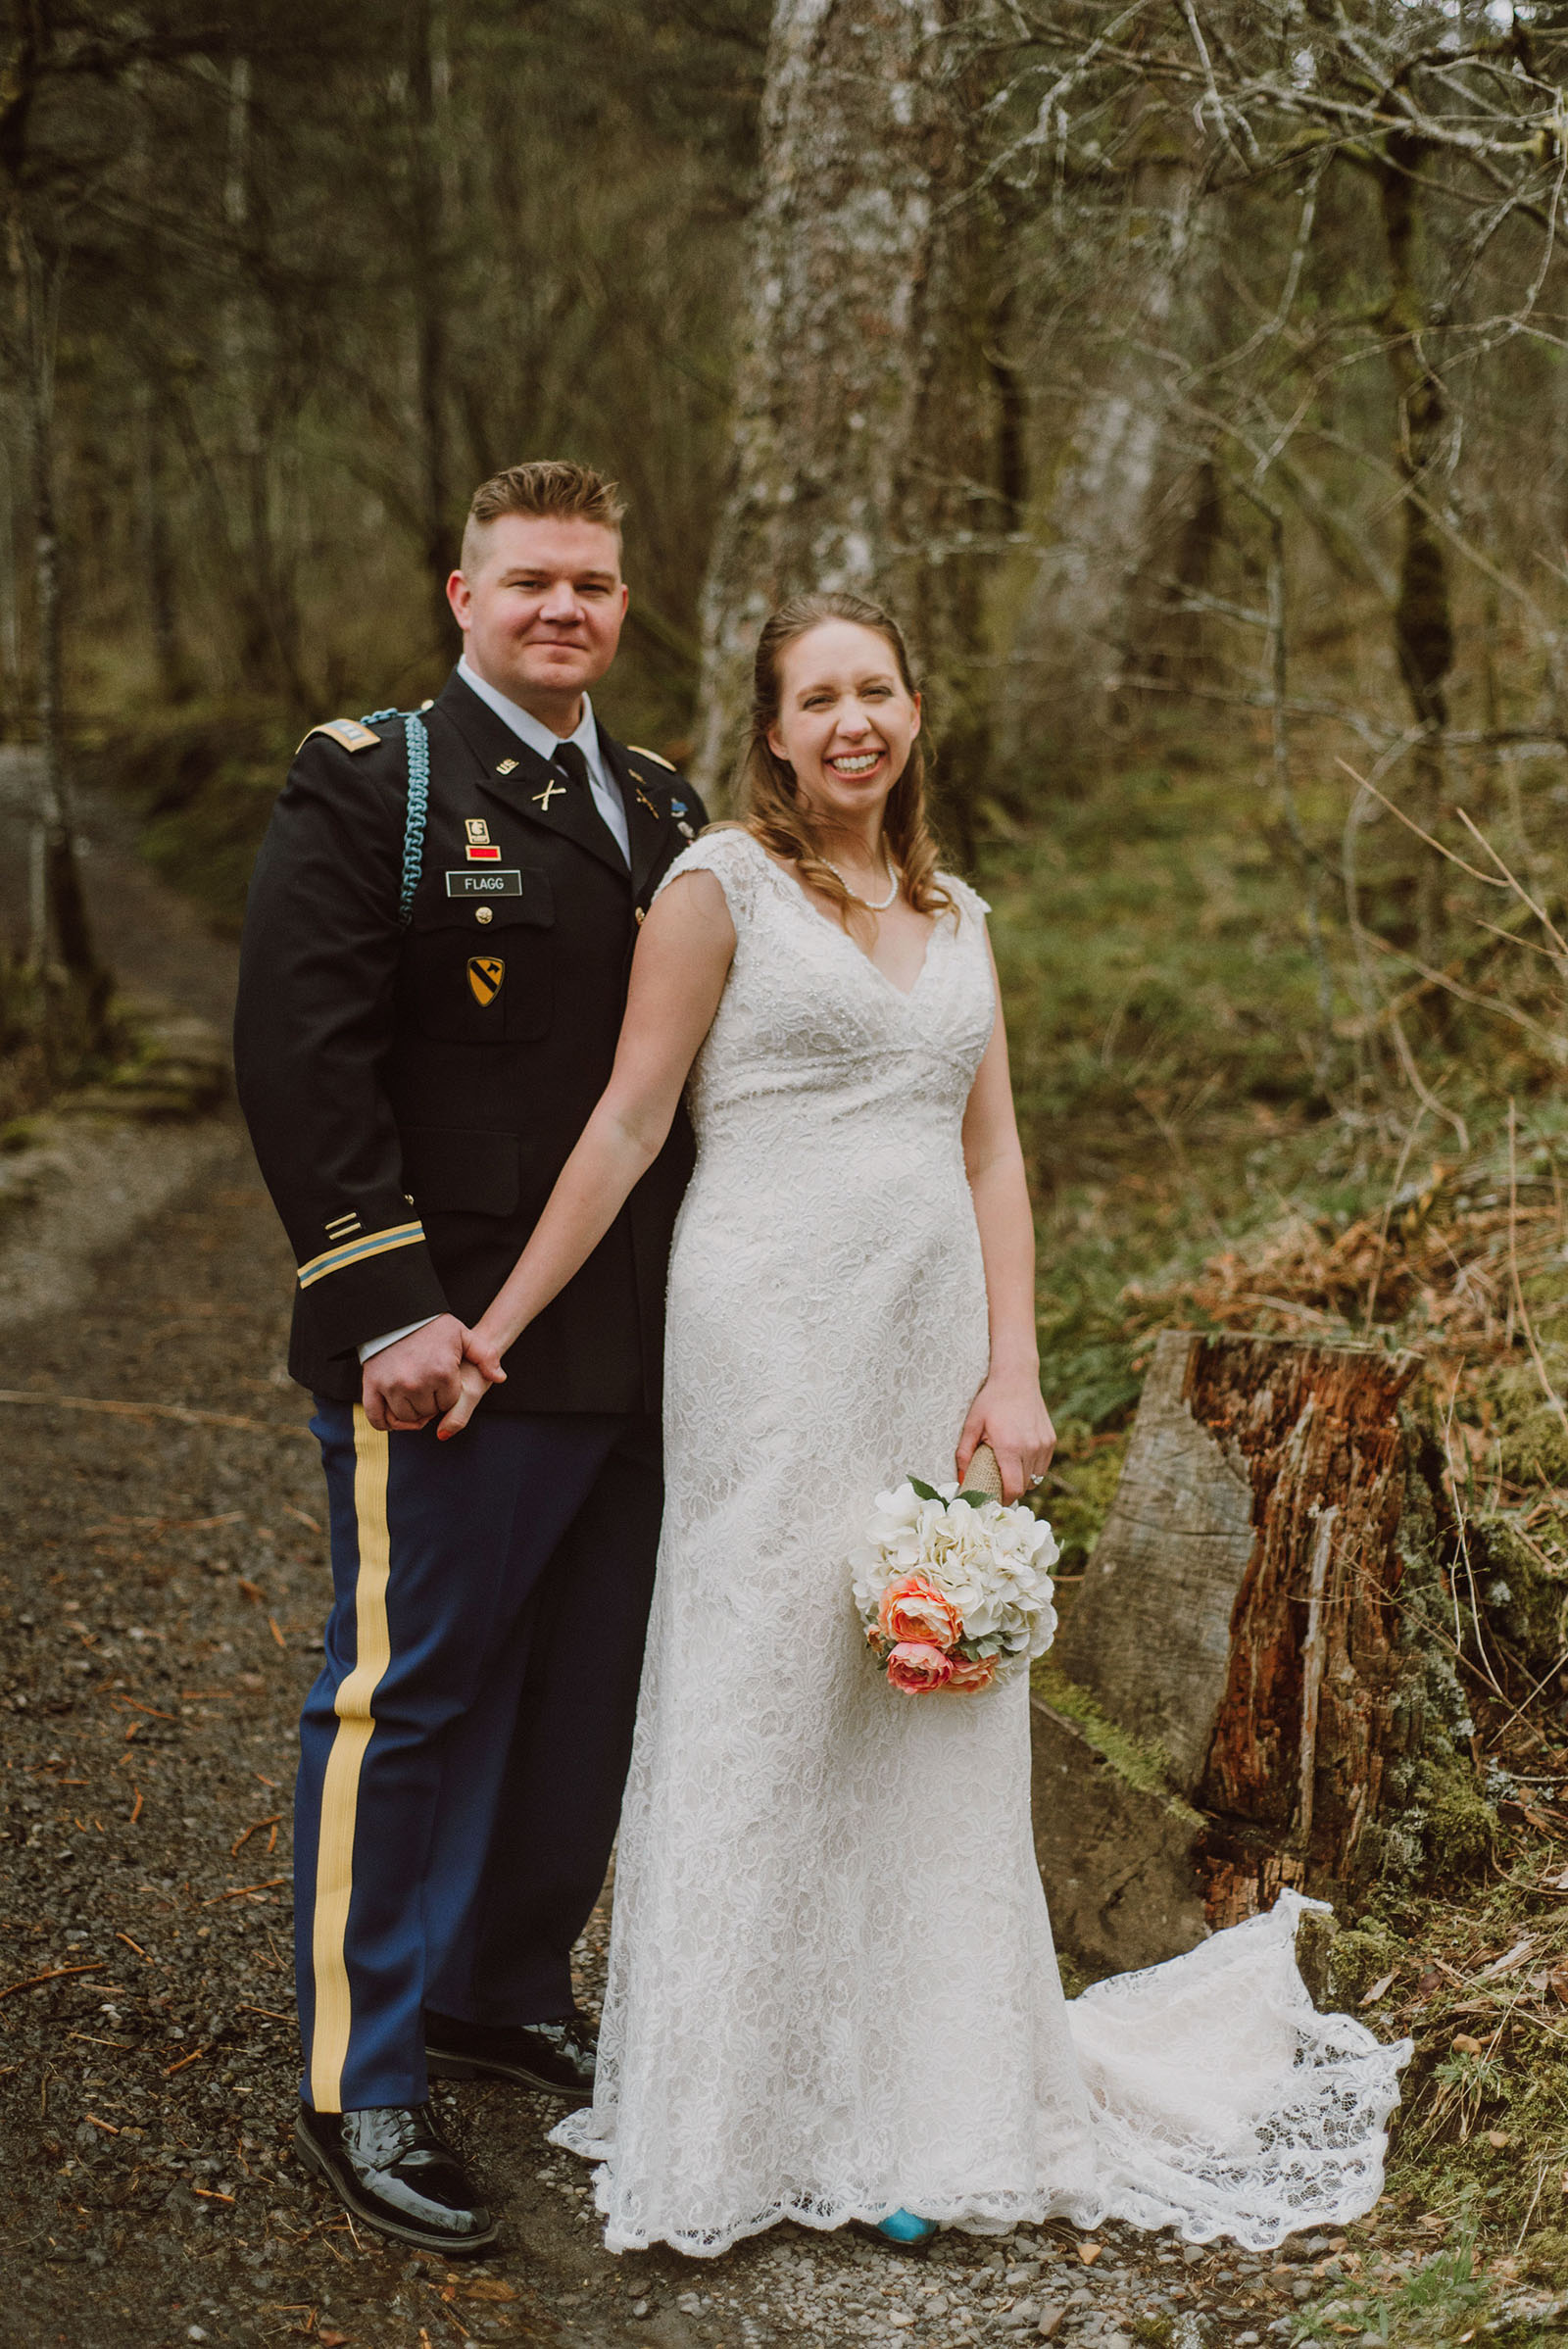 Portraits of Bride and Groom on the hiking trail | Bridal Veil Elopement Photographer